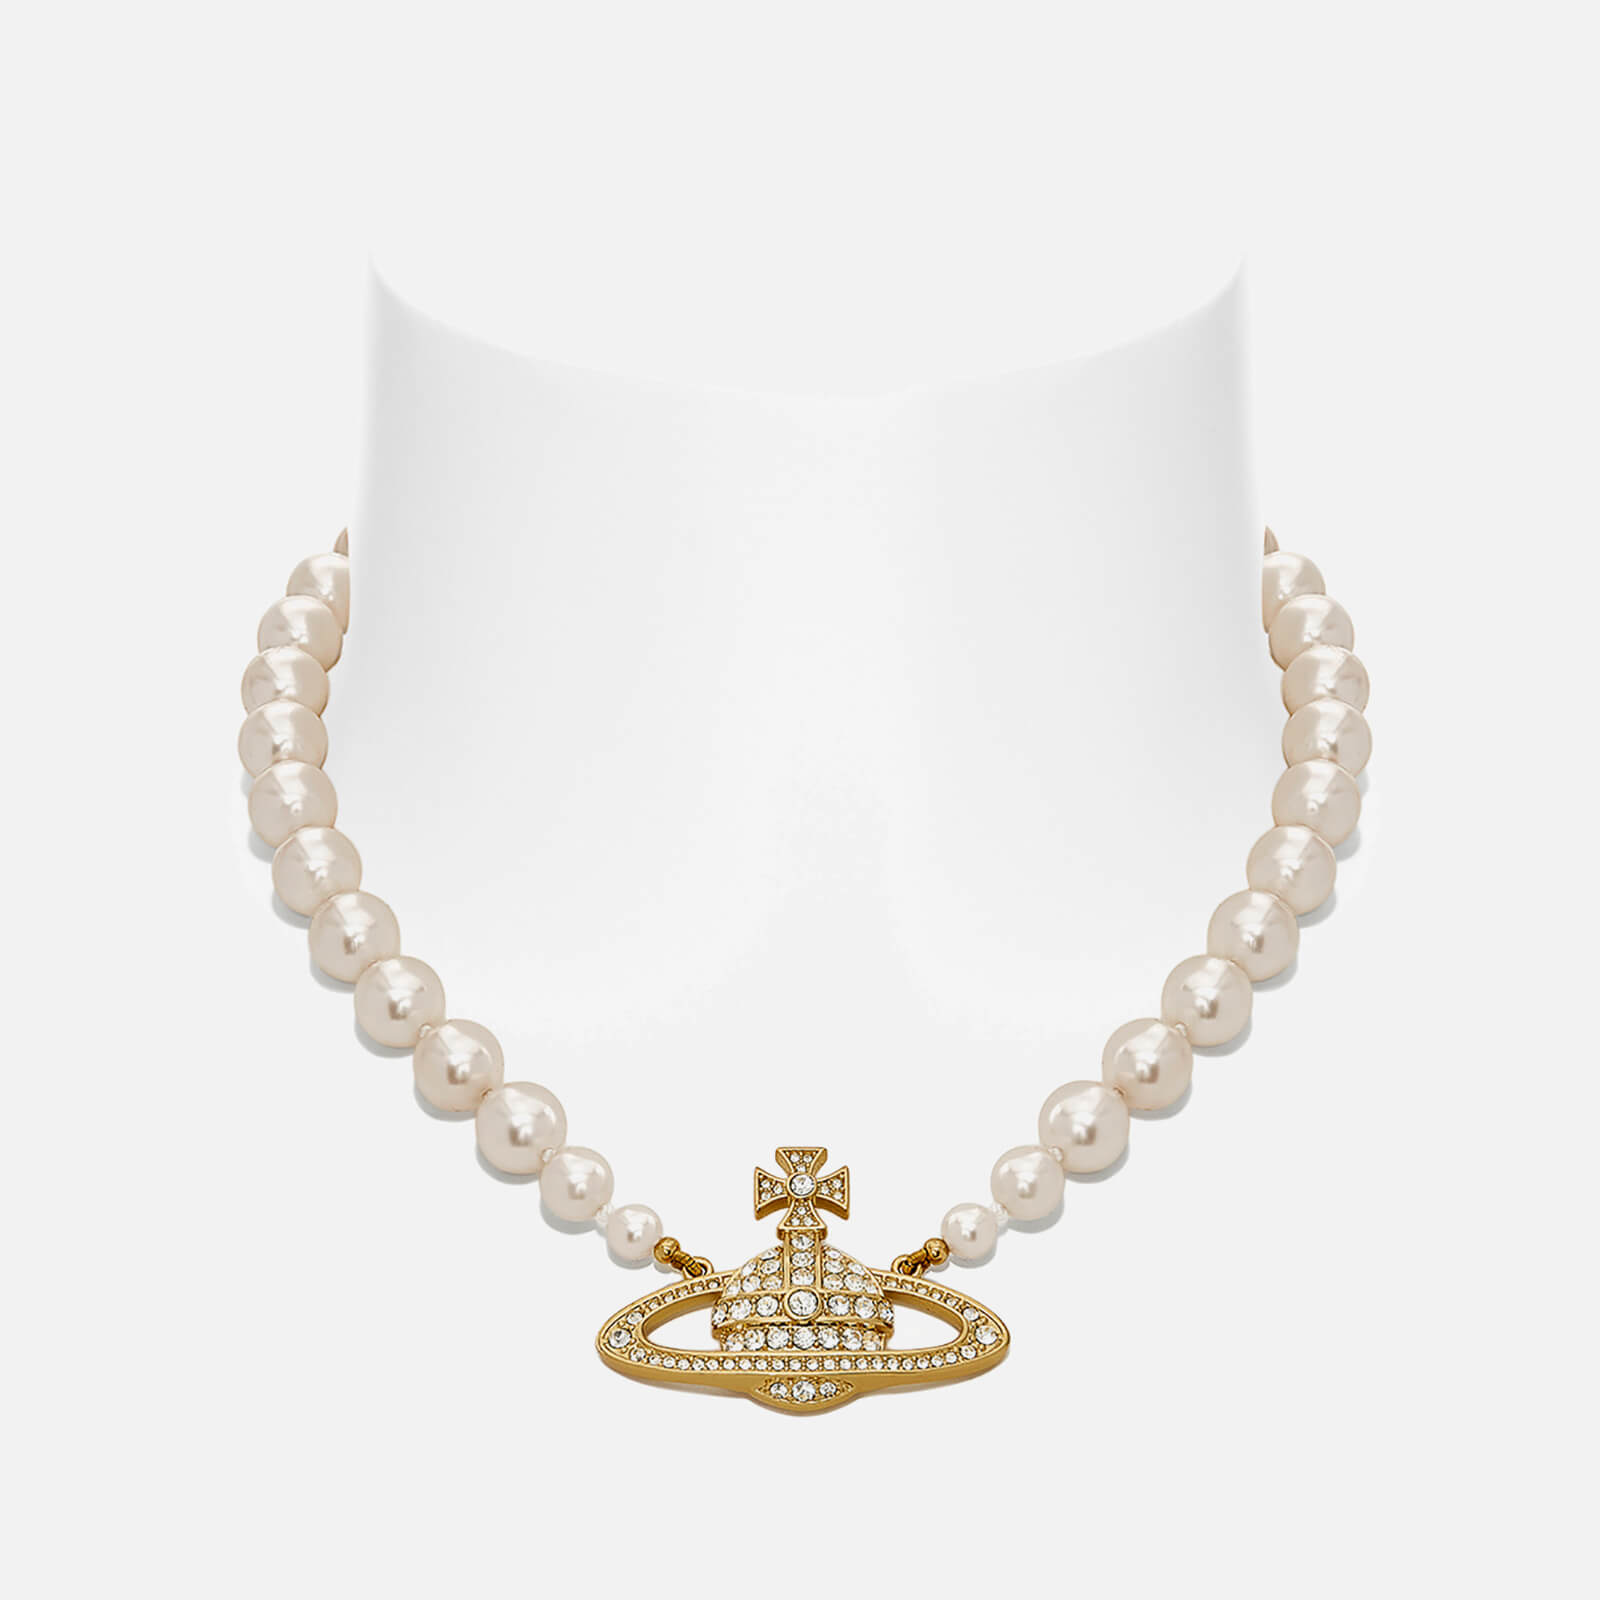 Vivienne Westwood Bas Relief Gold-Tone, Faux Pearl and Crystal Choker